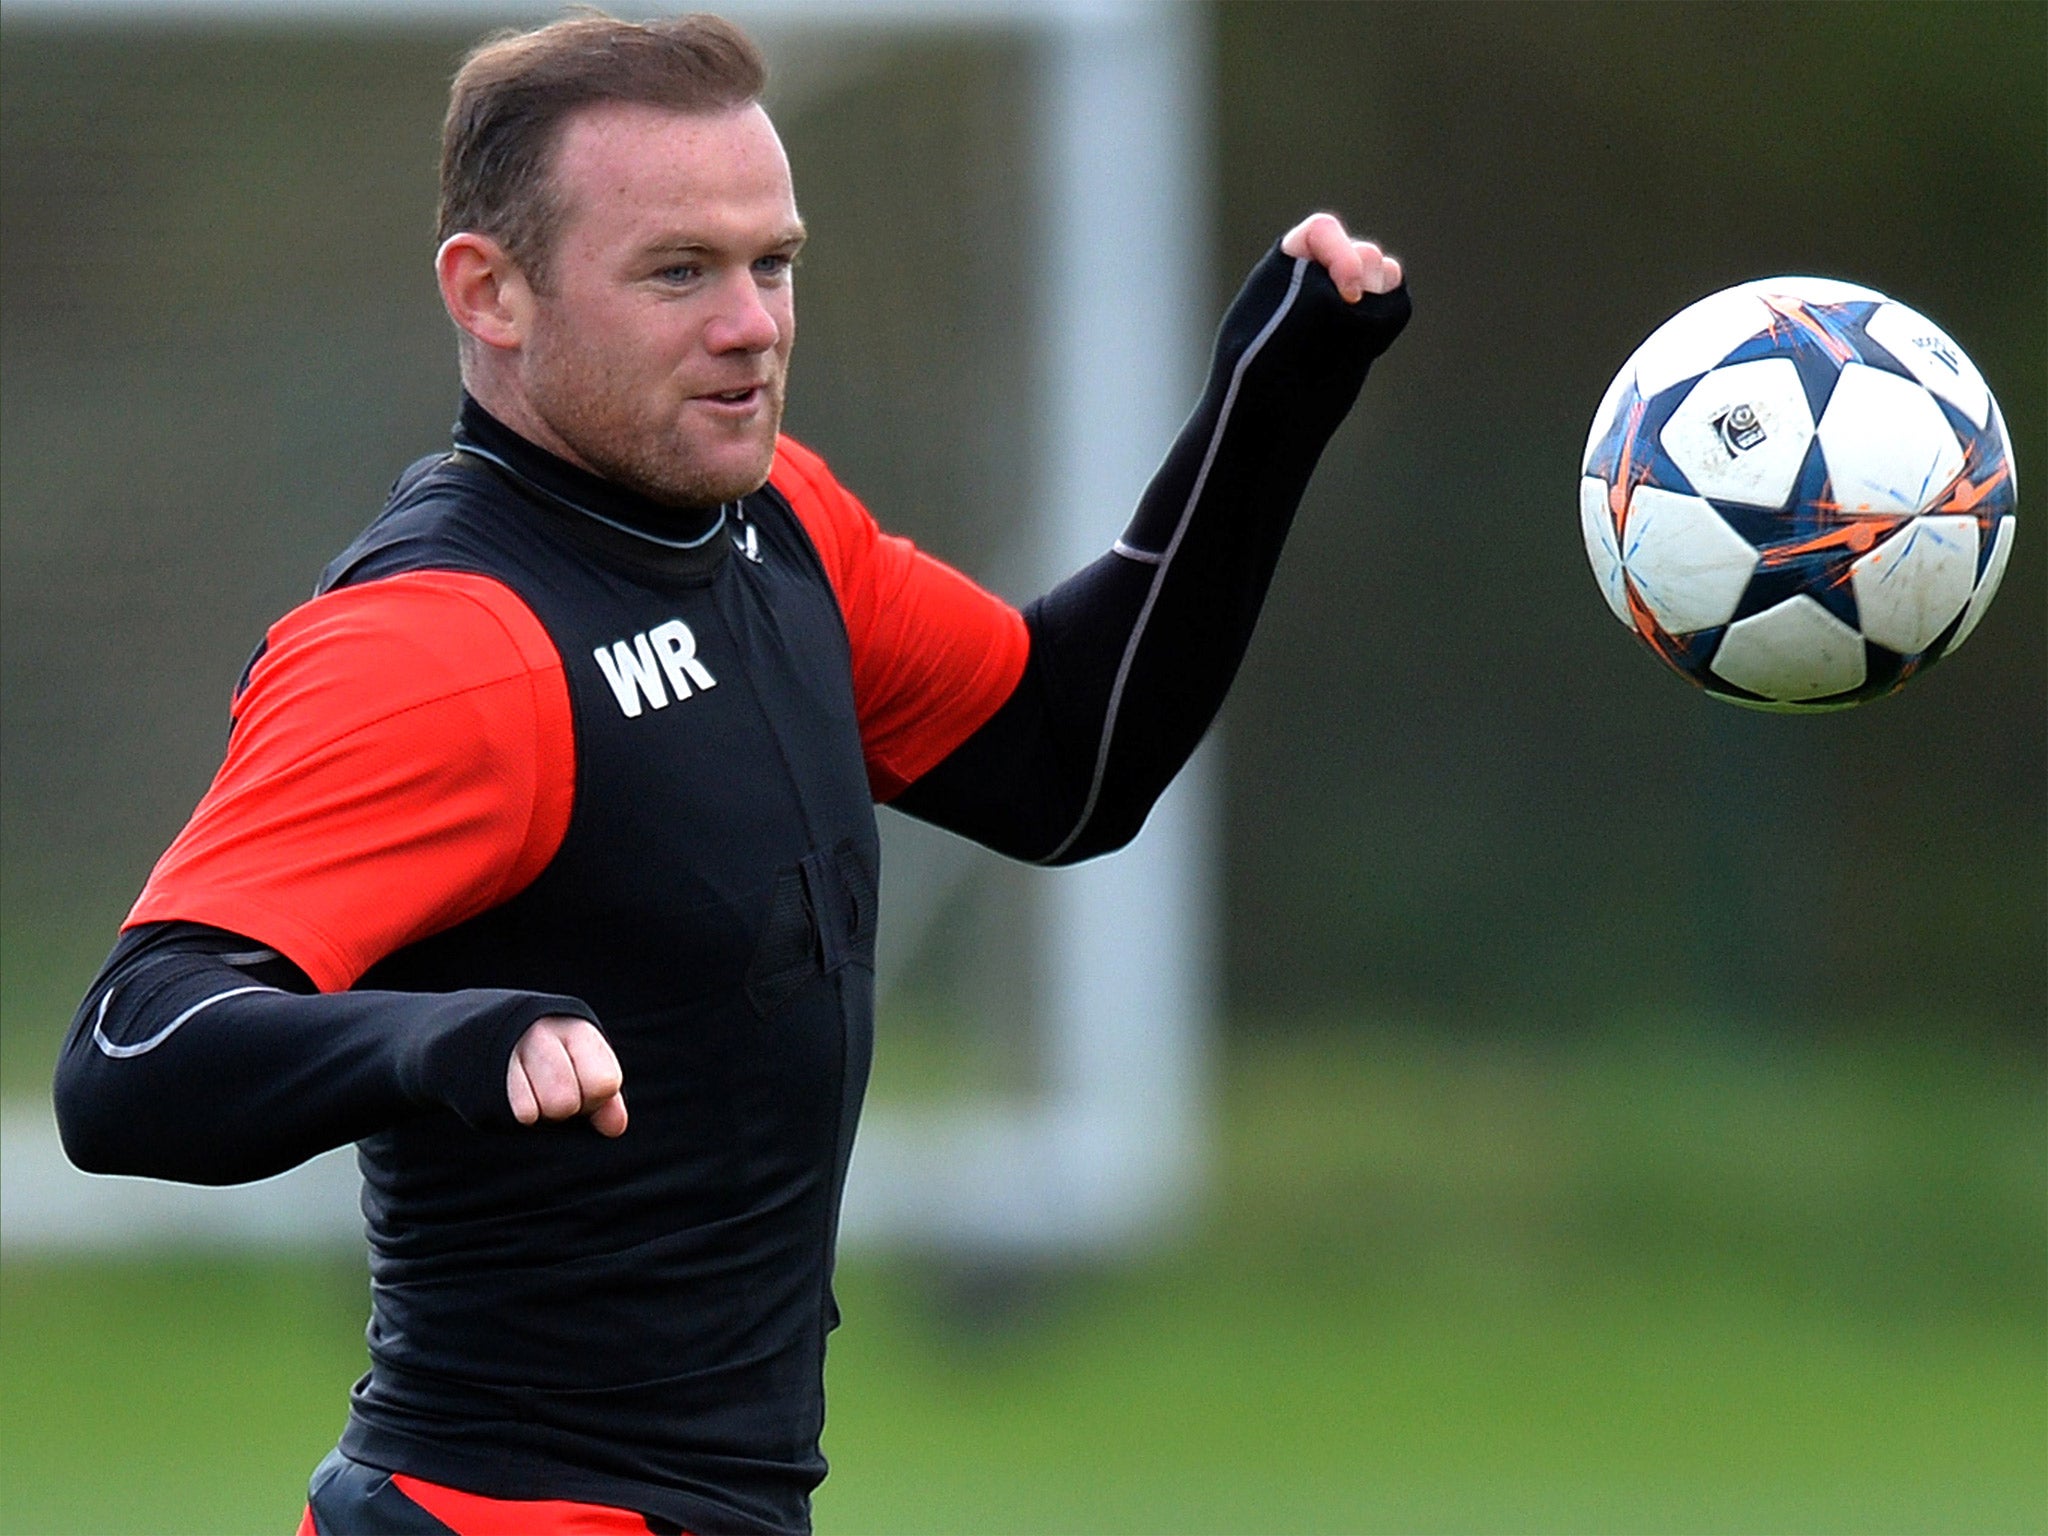 Wayne Rooney is expected to start against Everton